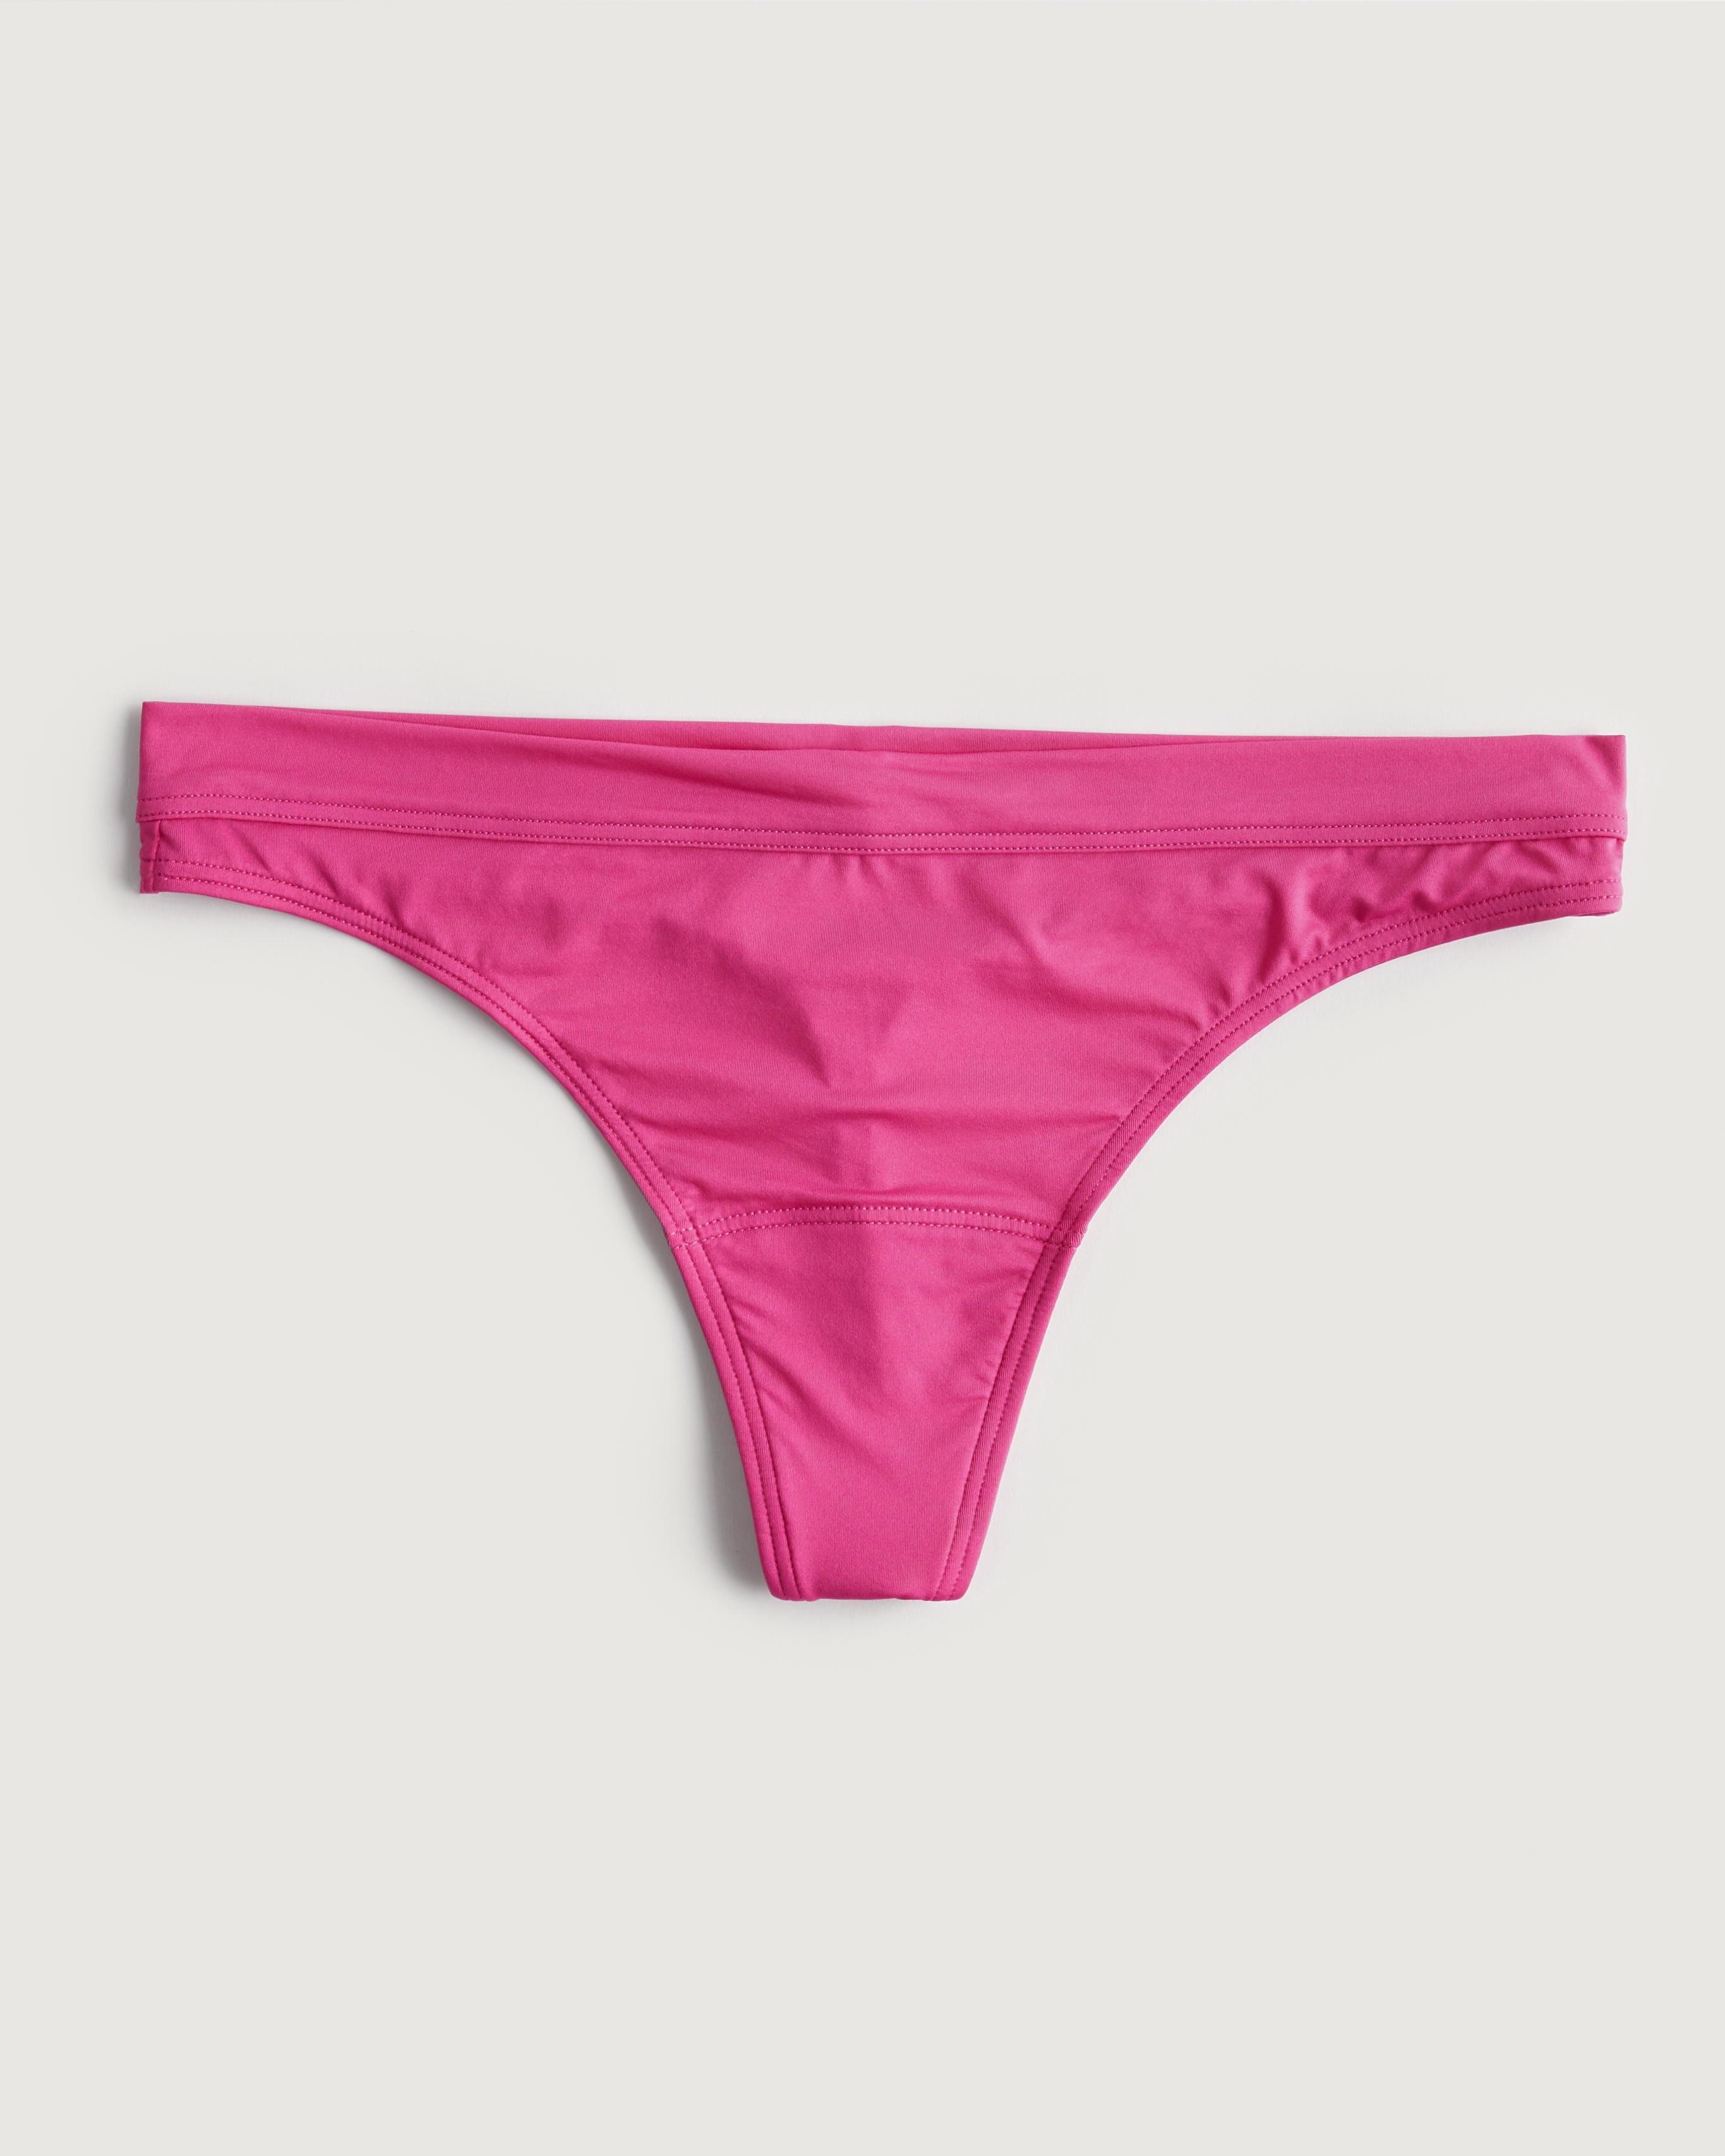 Hollister Gilly Hicks Micro Thong Underwear in Pink